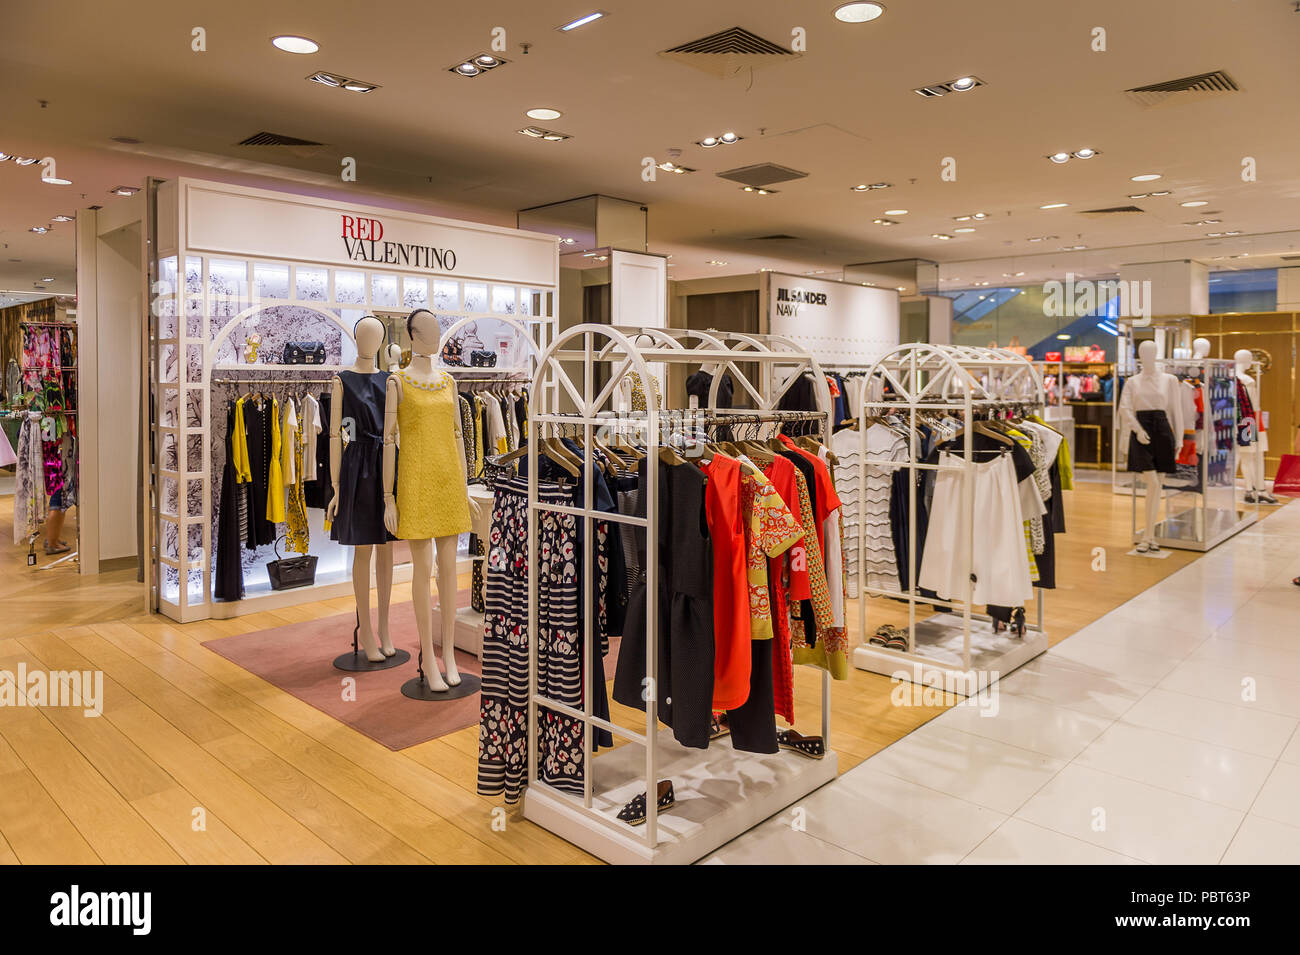 PARIS, FRANCE JUN 6, 2015: Red Valentino in the Galeries Lafayette city mall. It open in 1912 Stock Photo - Alamy